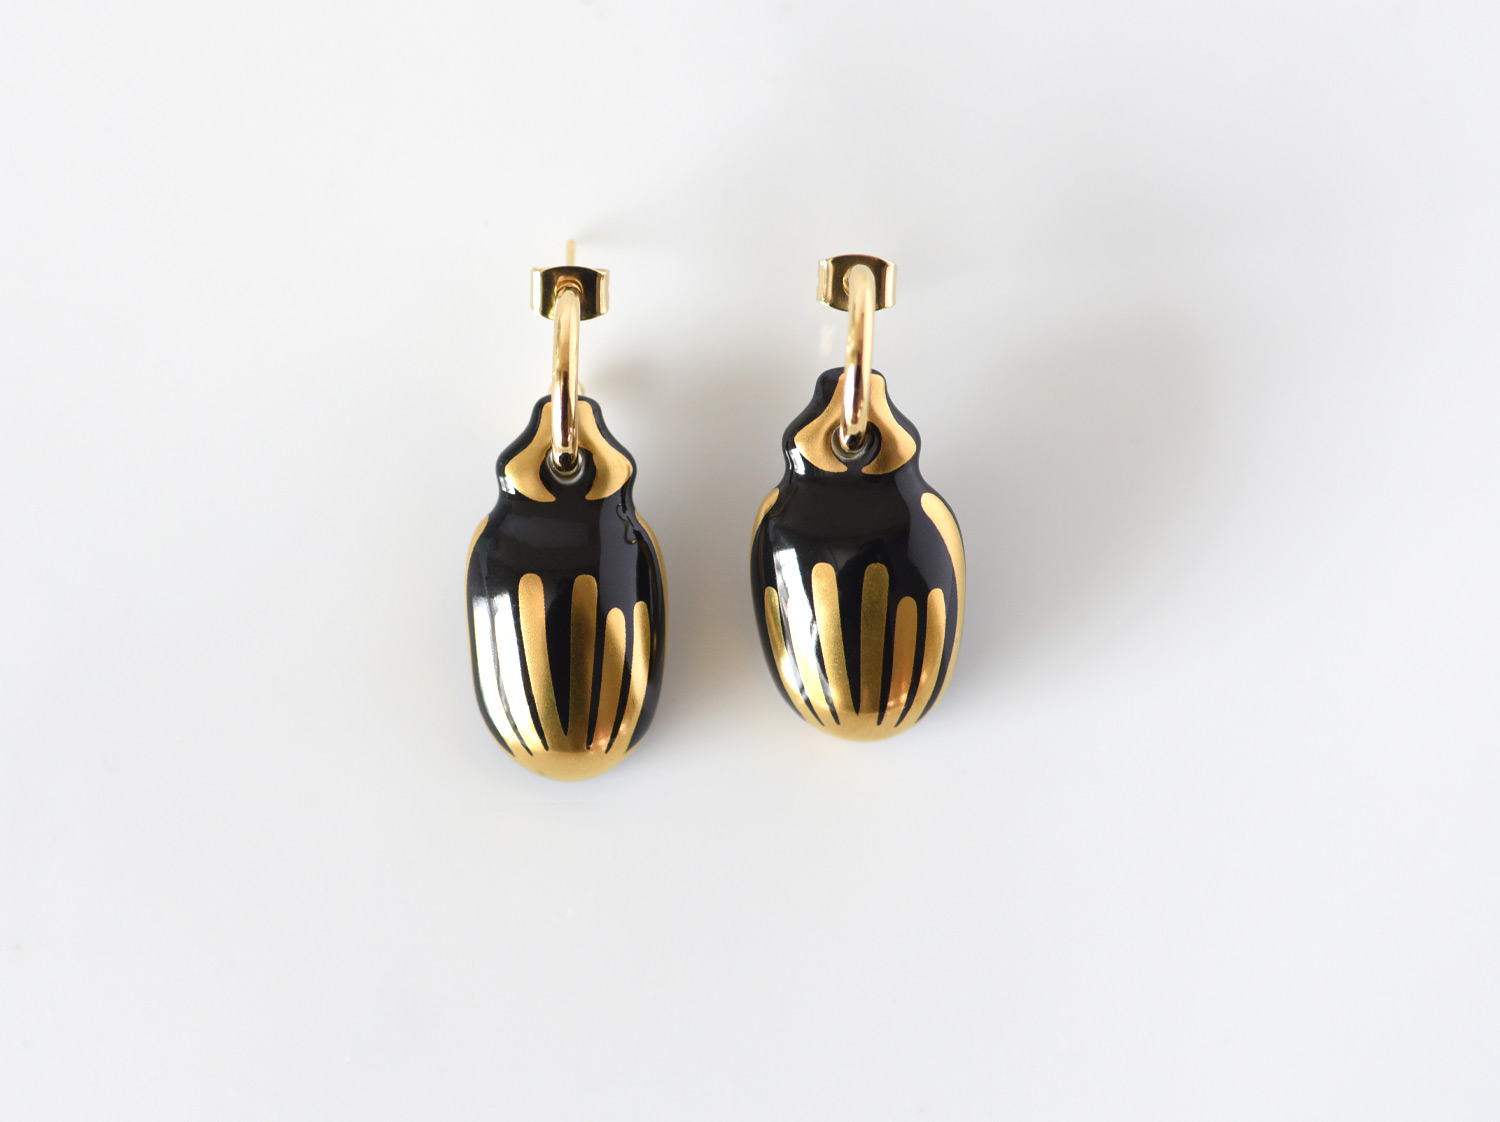 China Scarabée Earrings Black & Gold of the collection SCARABEE NOIR OR | Bernardaud